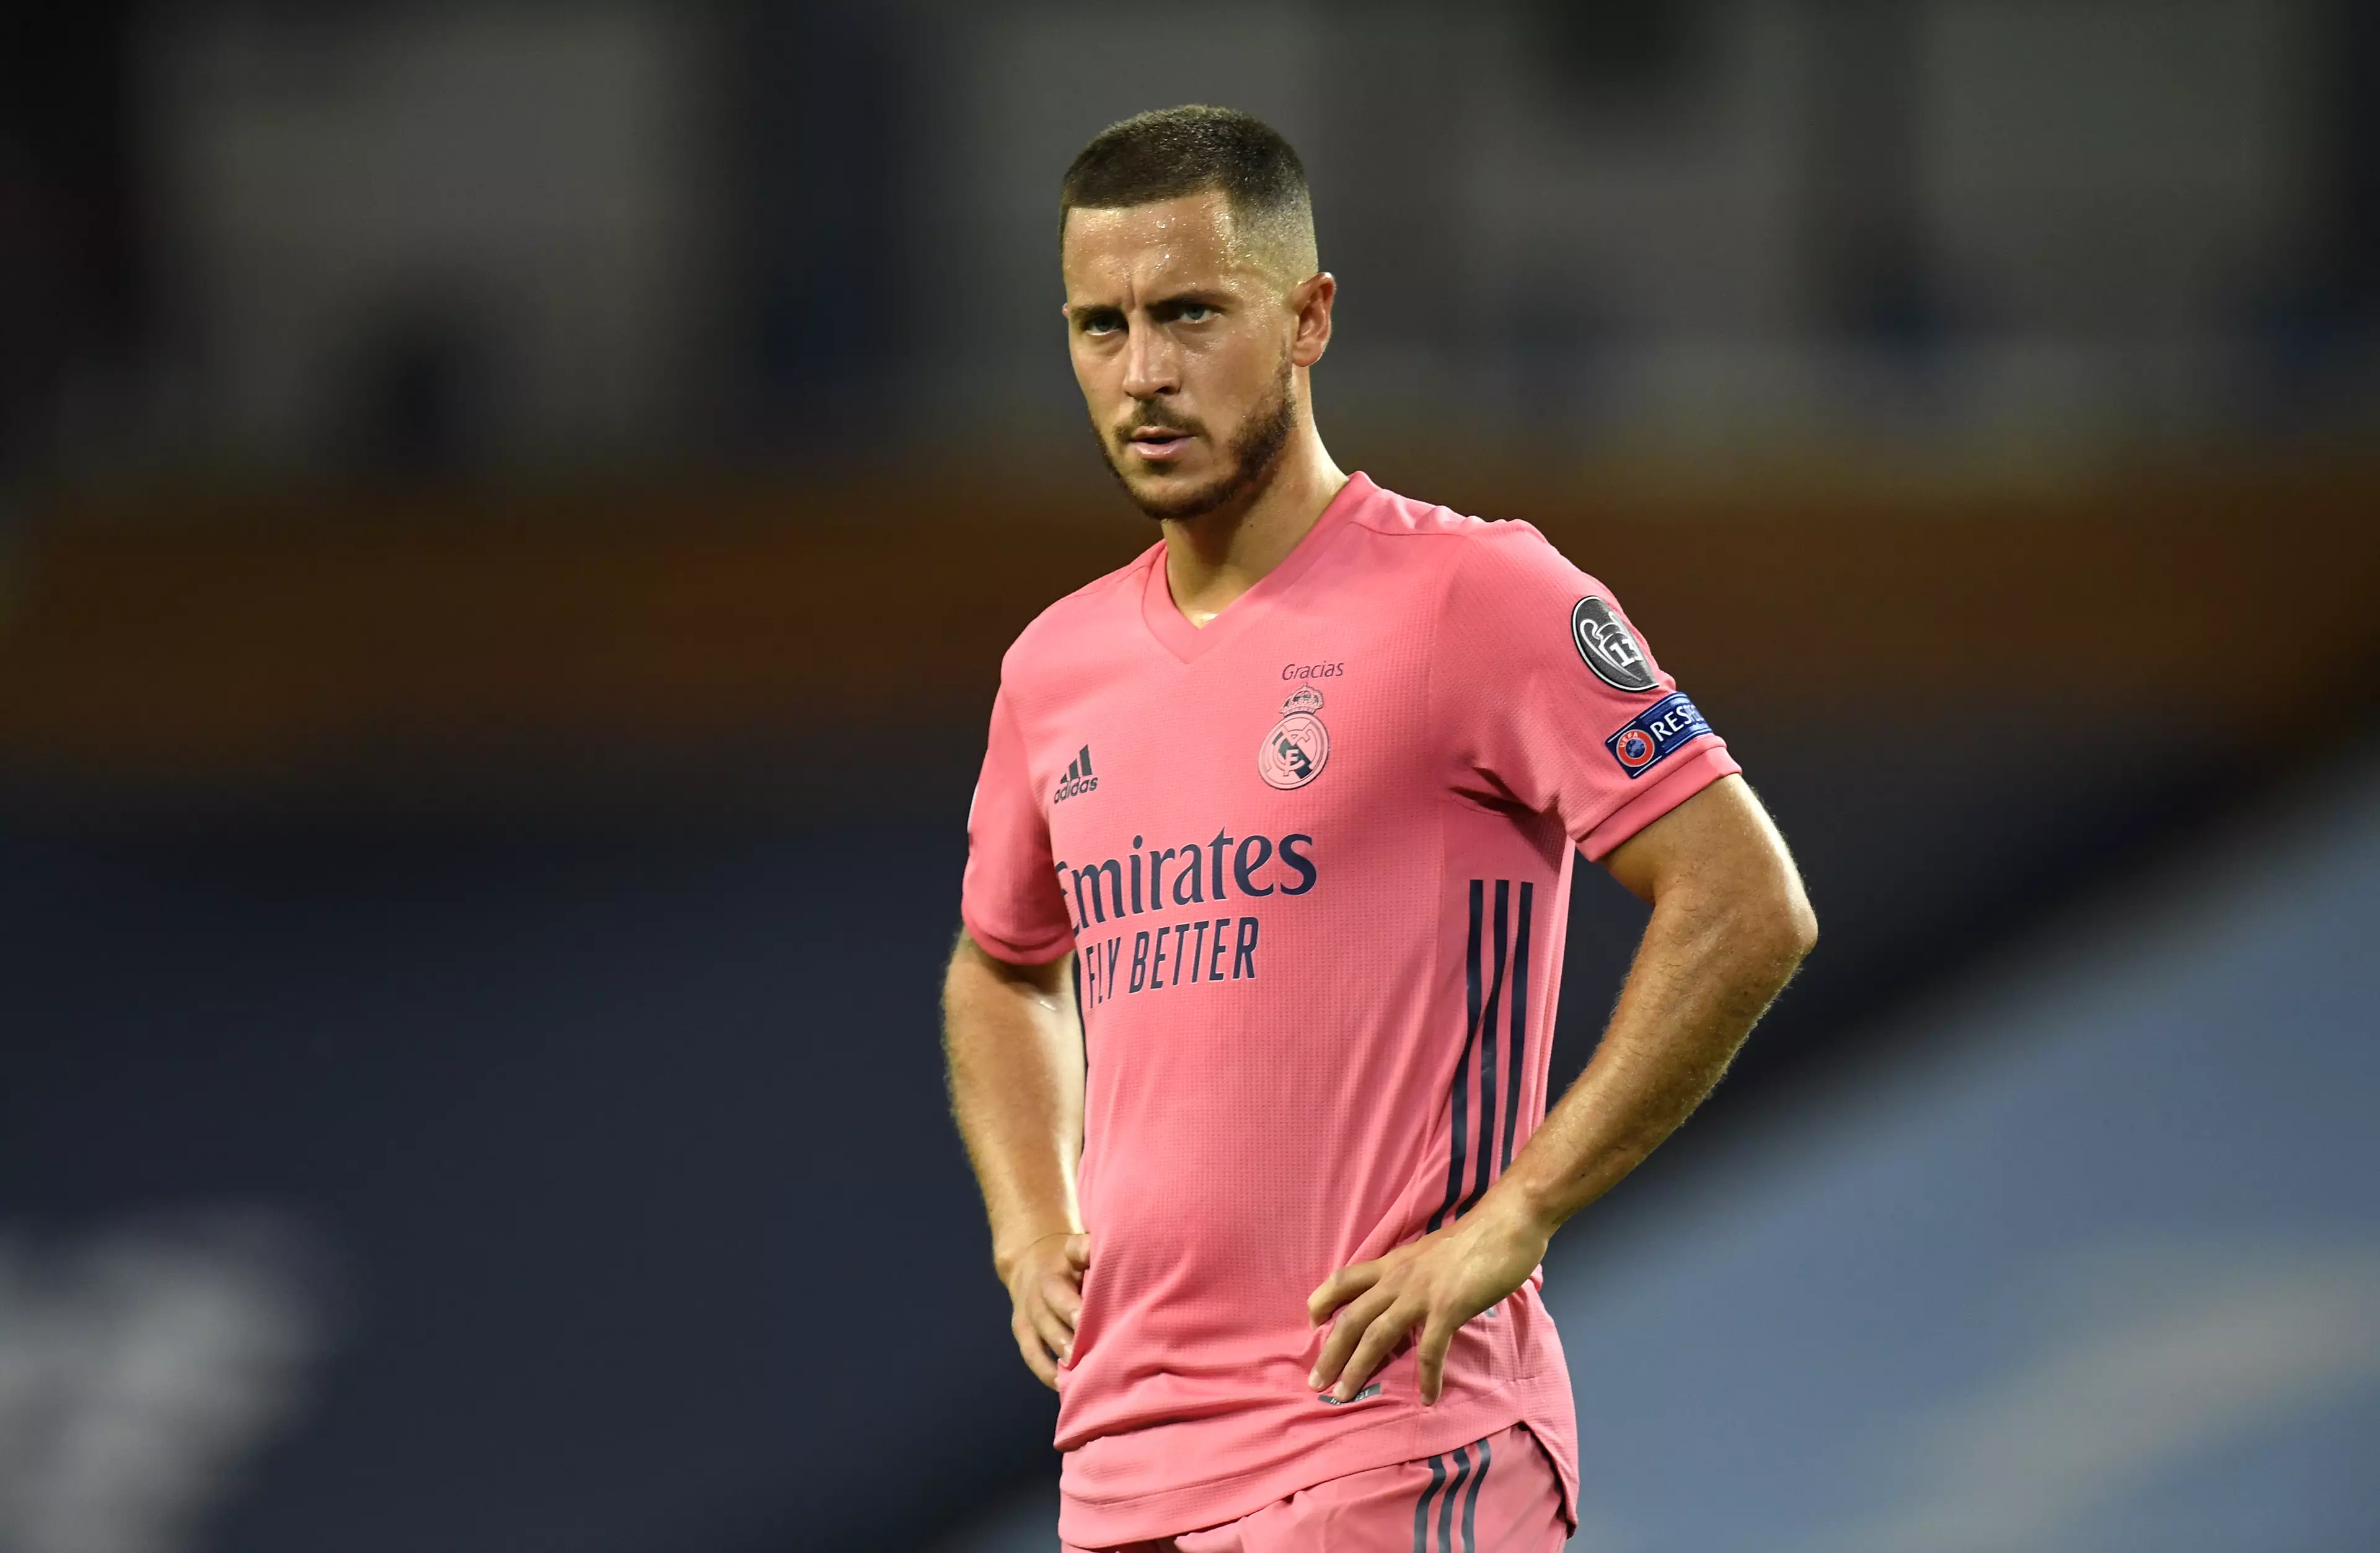 Eden Hazard will be looking to influence the game against his former club